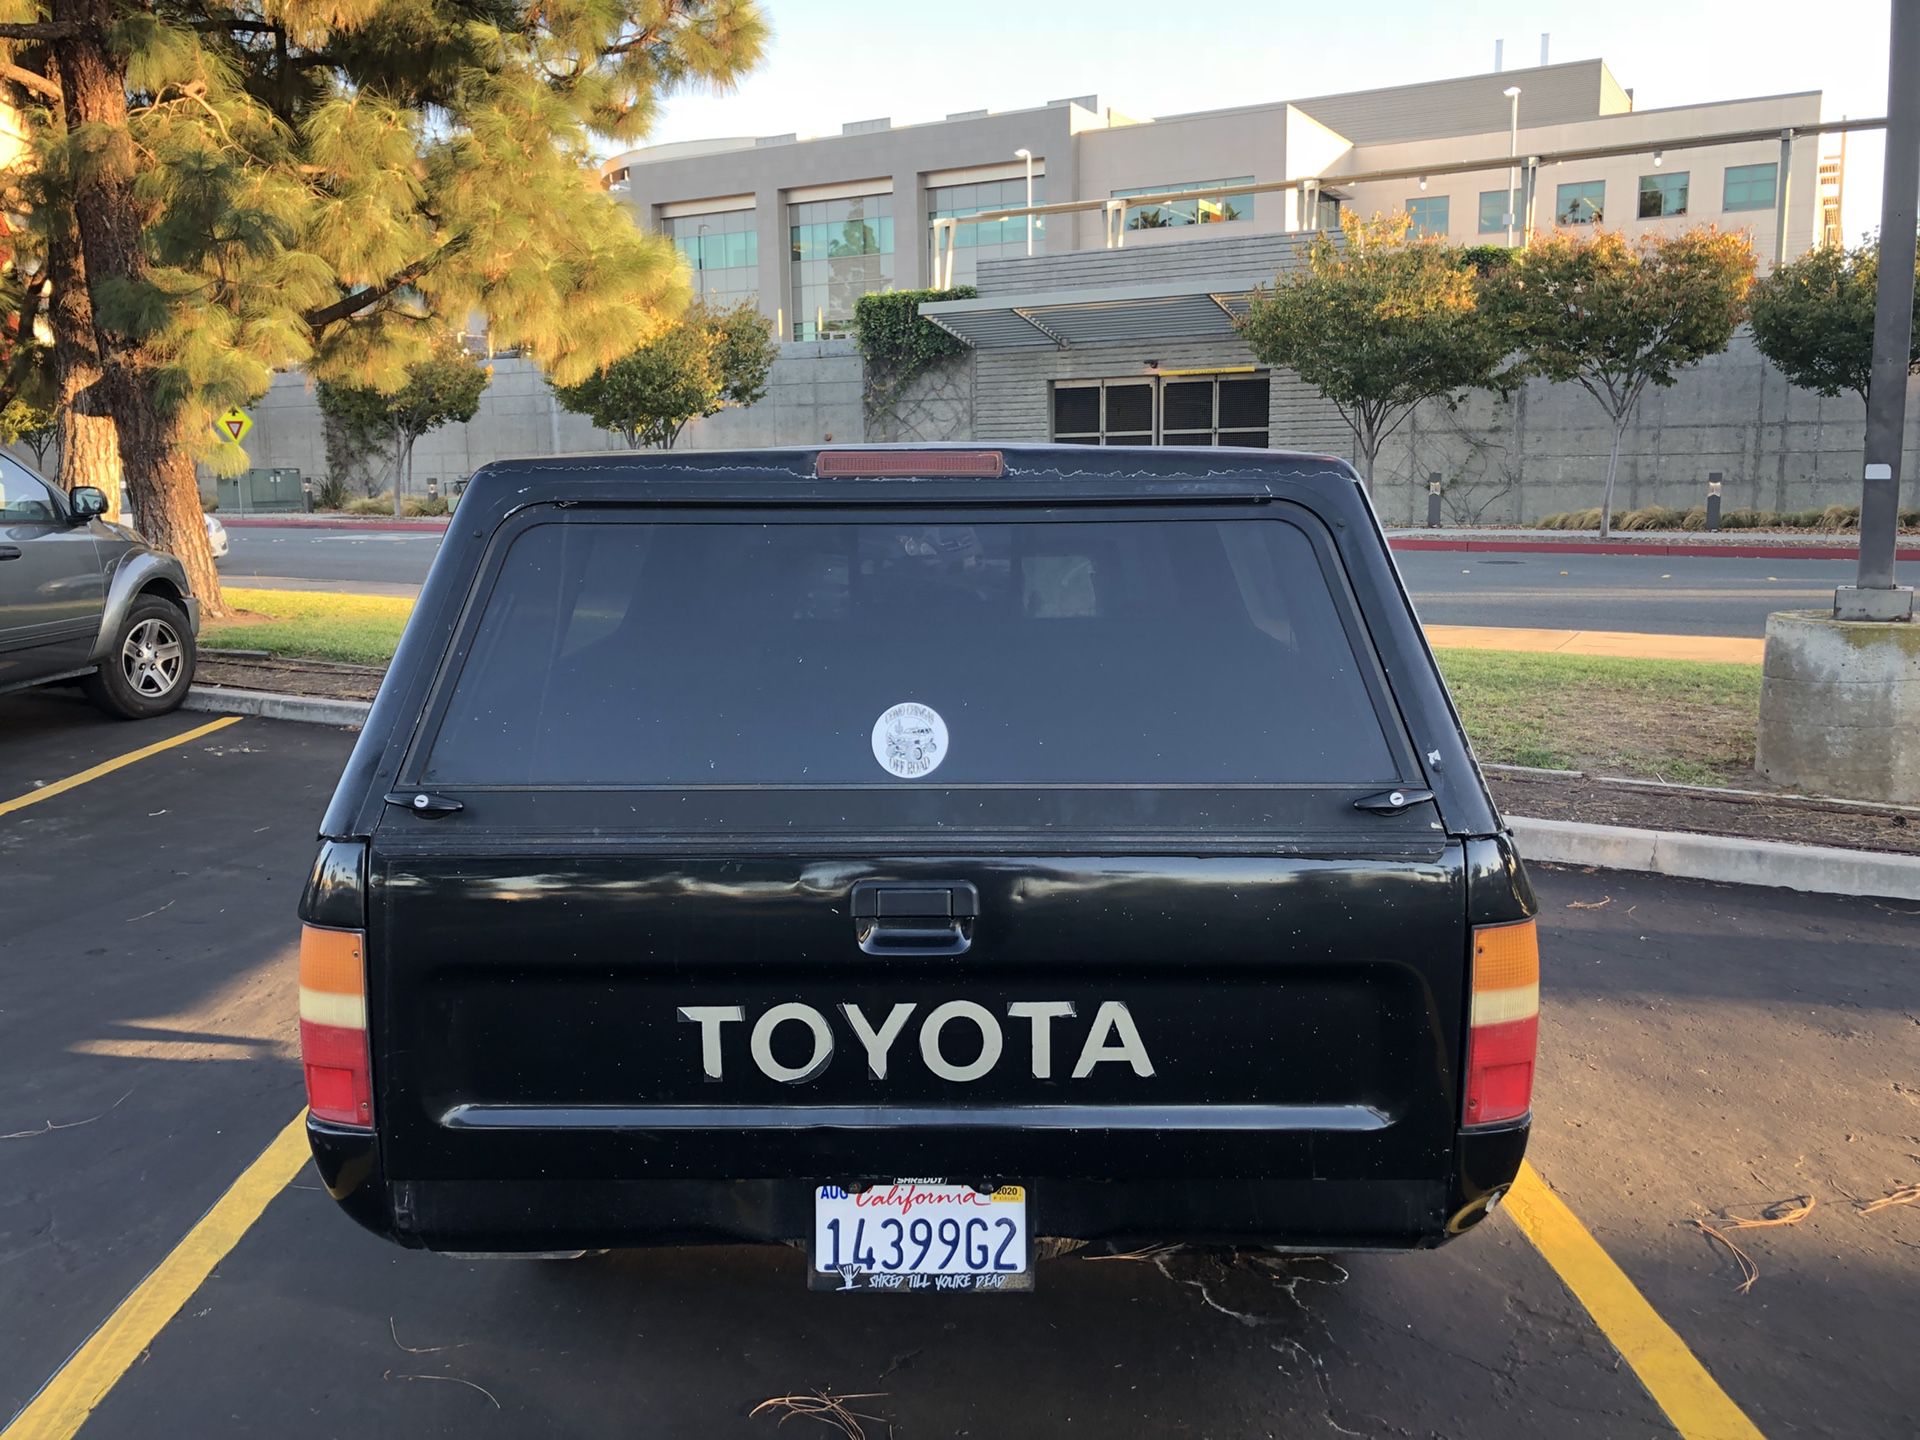 Toyota Pickup Camper Shell For Sale In Lakeside Ca Offerup